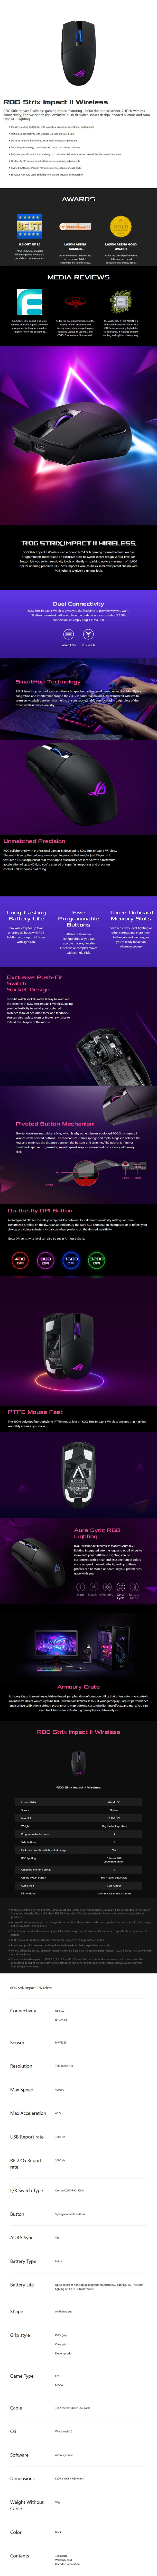 ASUS ROG Strix Impact II RGB Optical Wireless Gaming Mouse - Desktop Overview 1